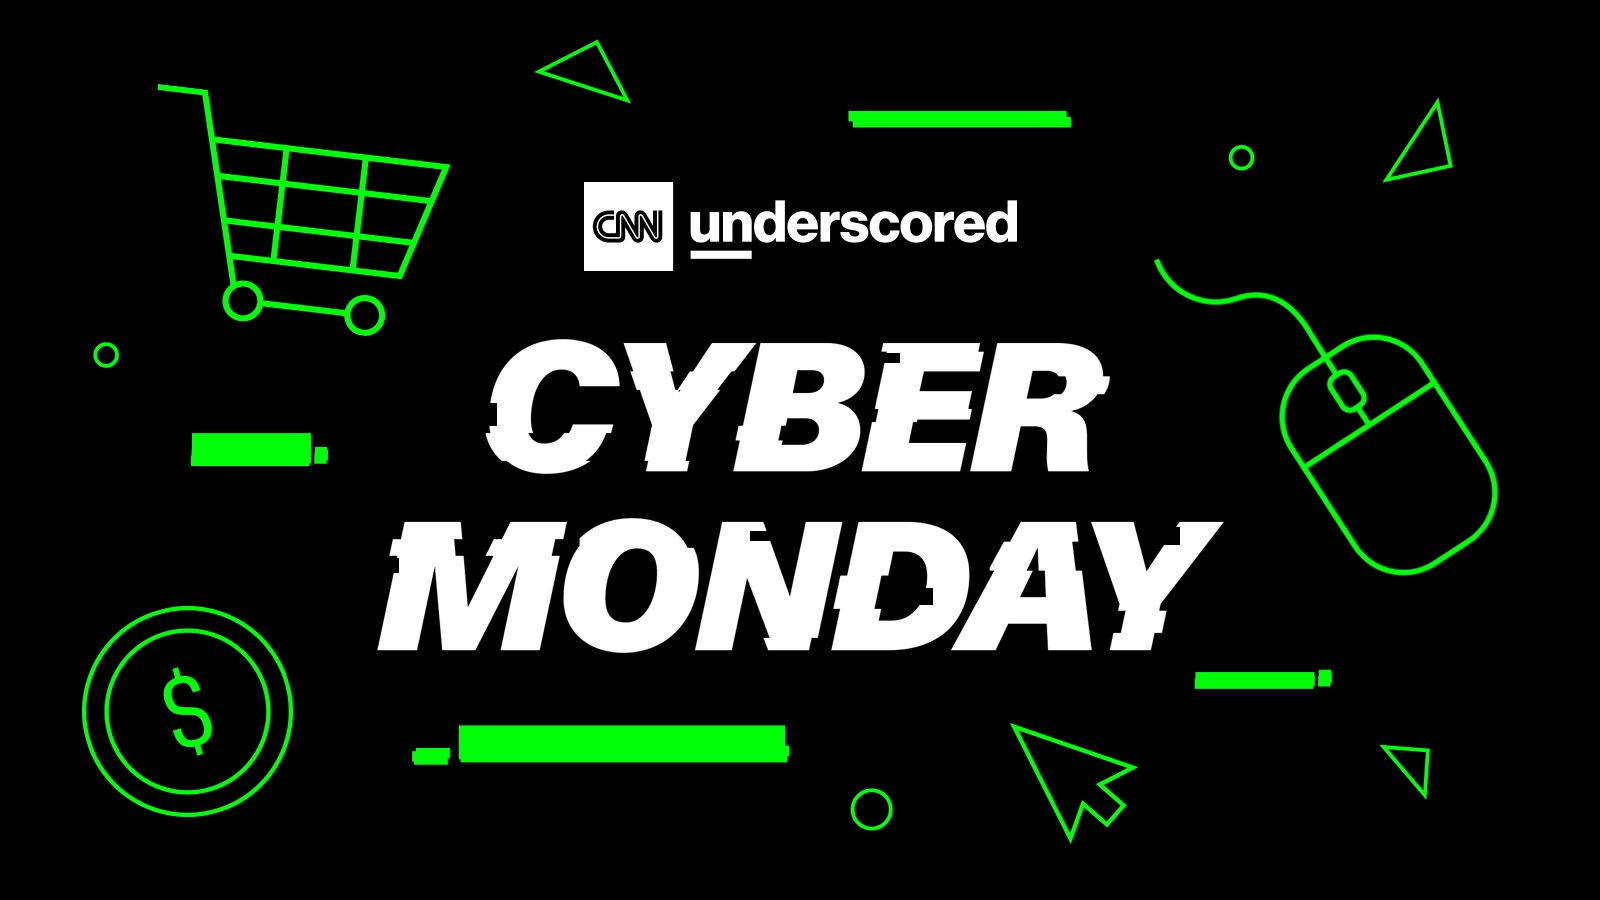 Cyber Monday Gadget And Shopping Carts Wallpaper